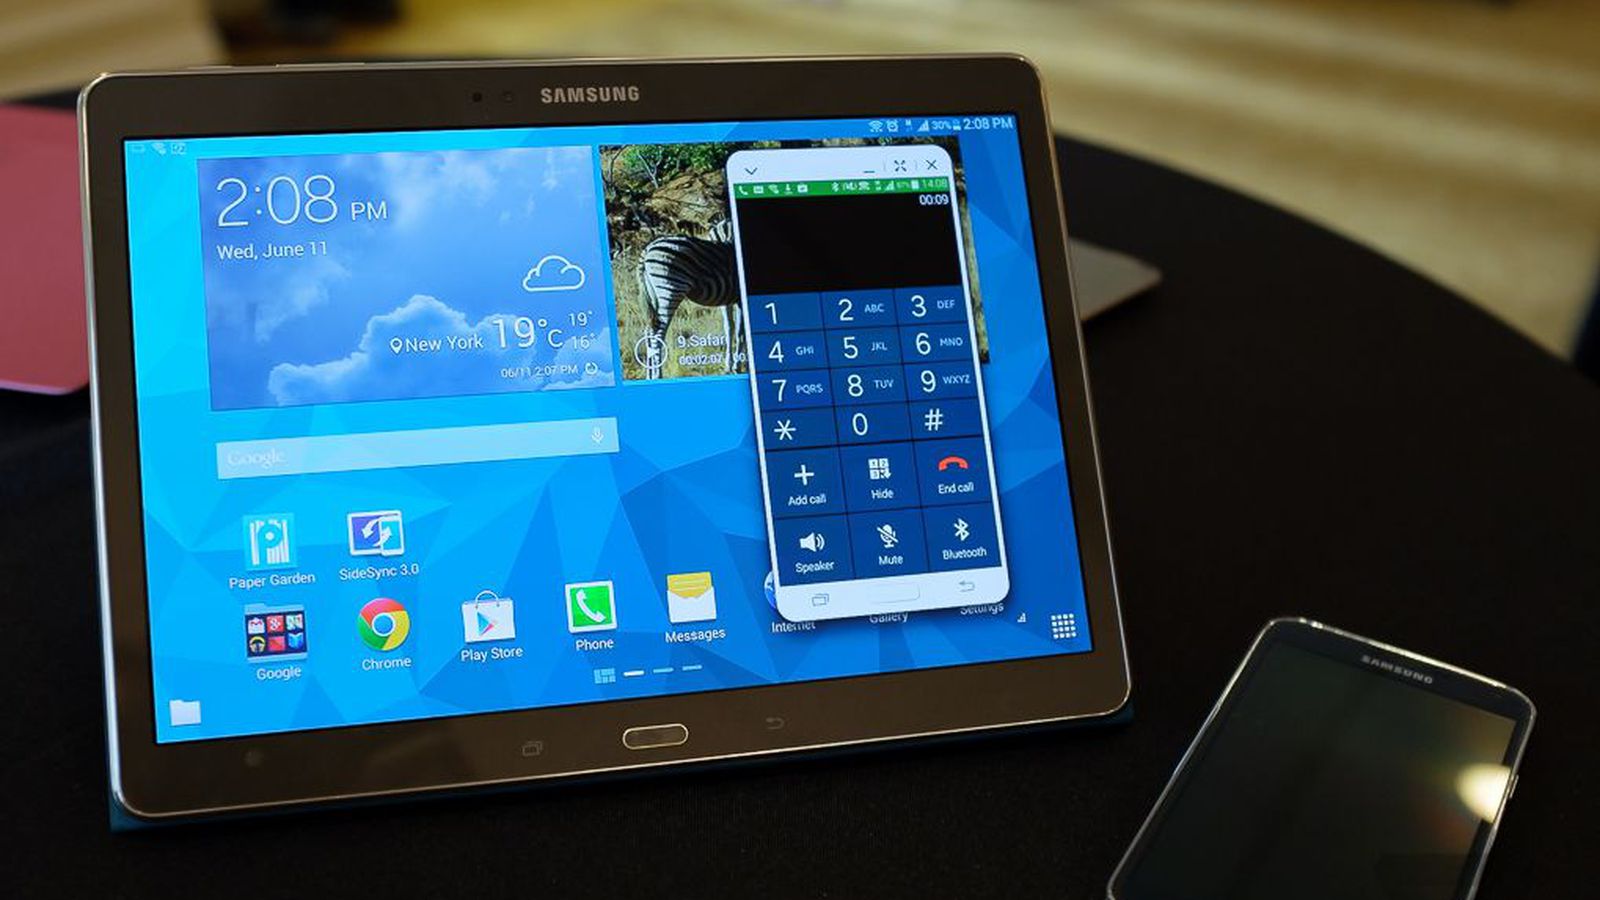 BlackBerry's new tablet is a Samsung Galaxy Tab S - The Verge